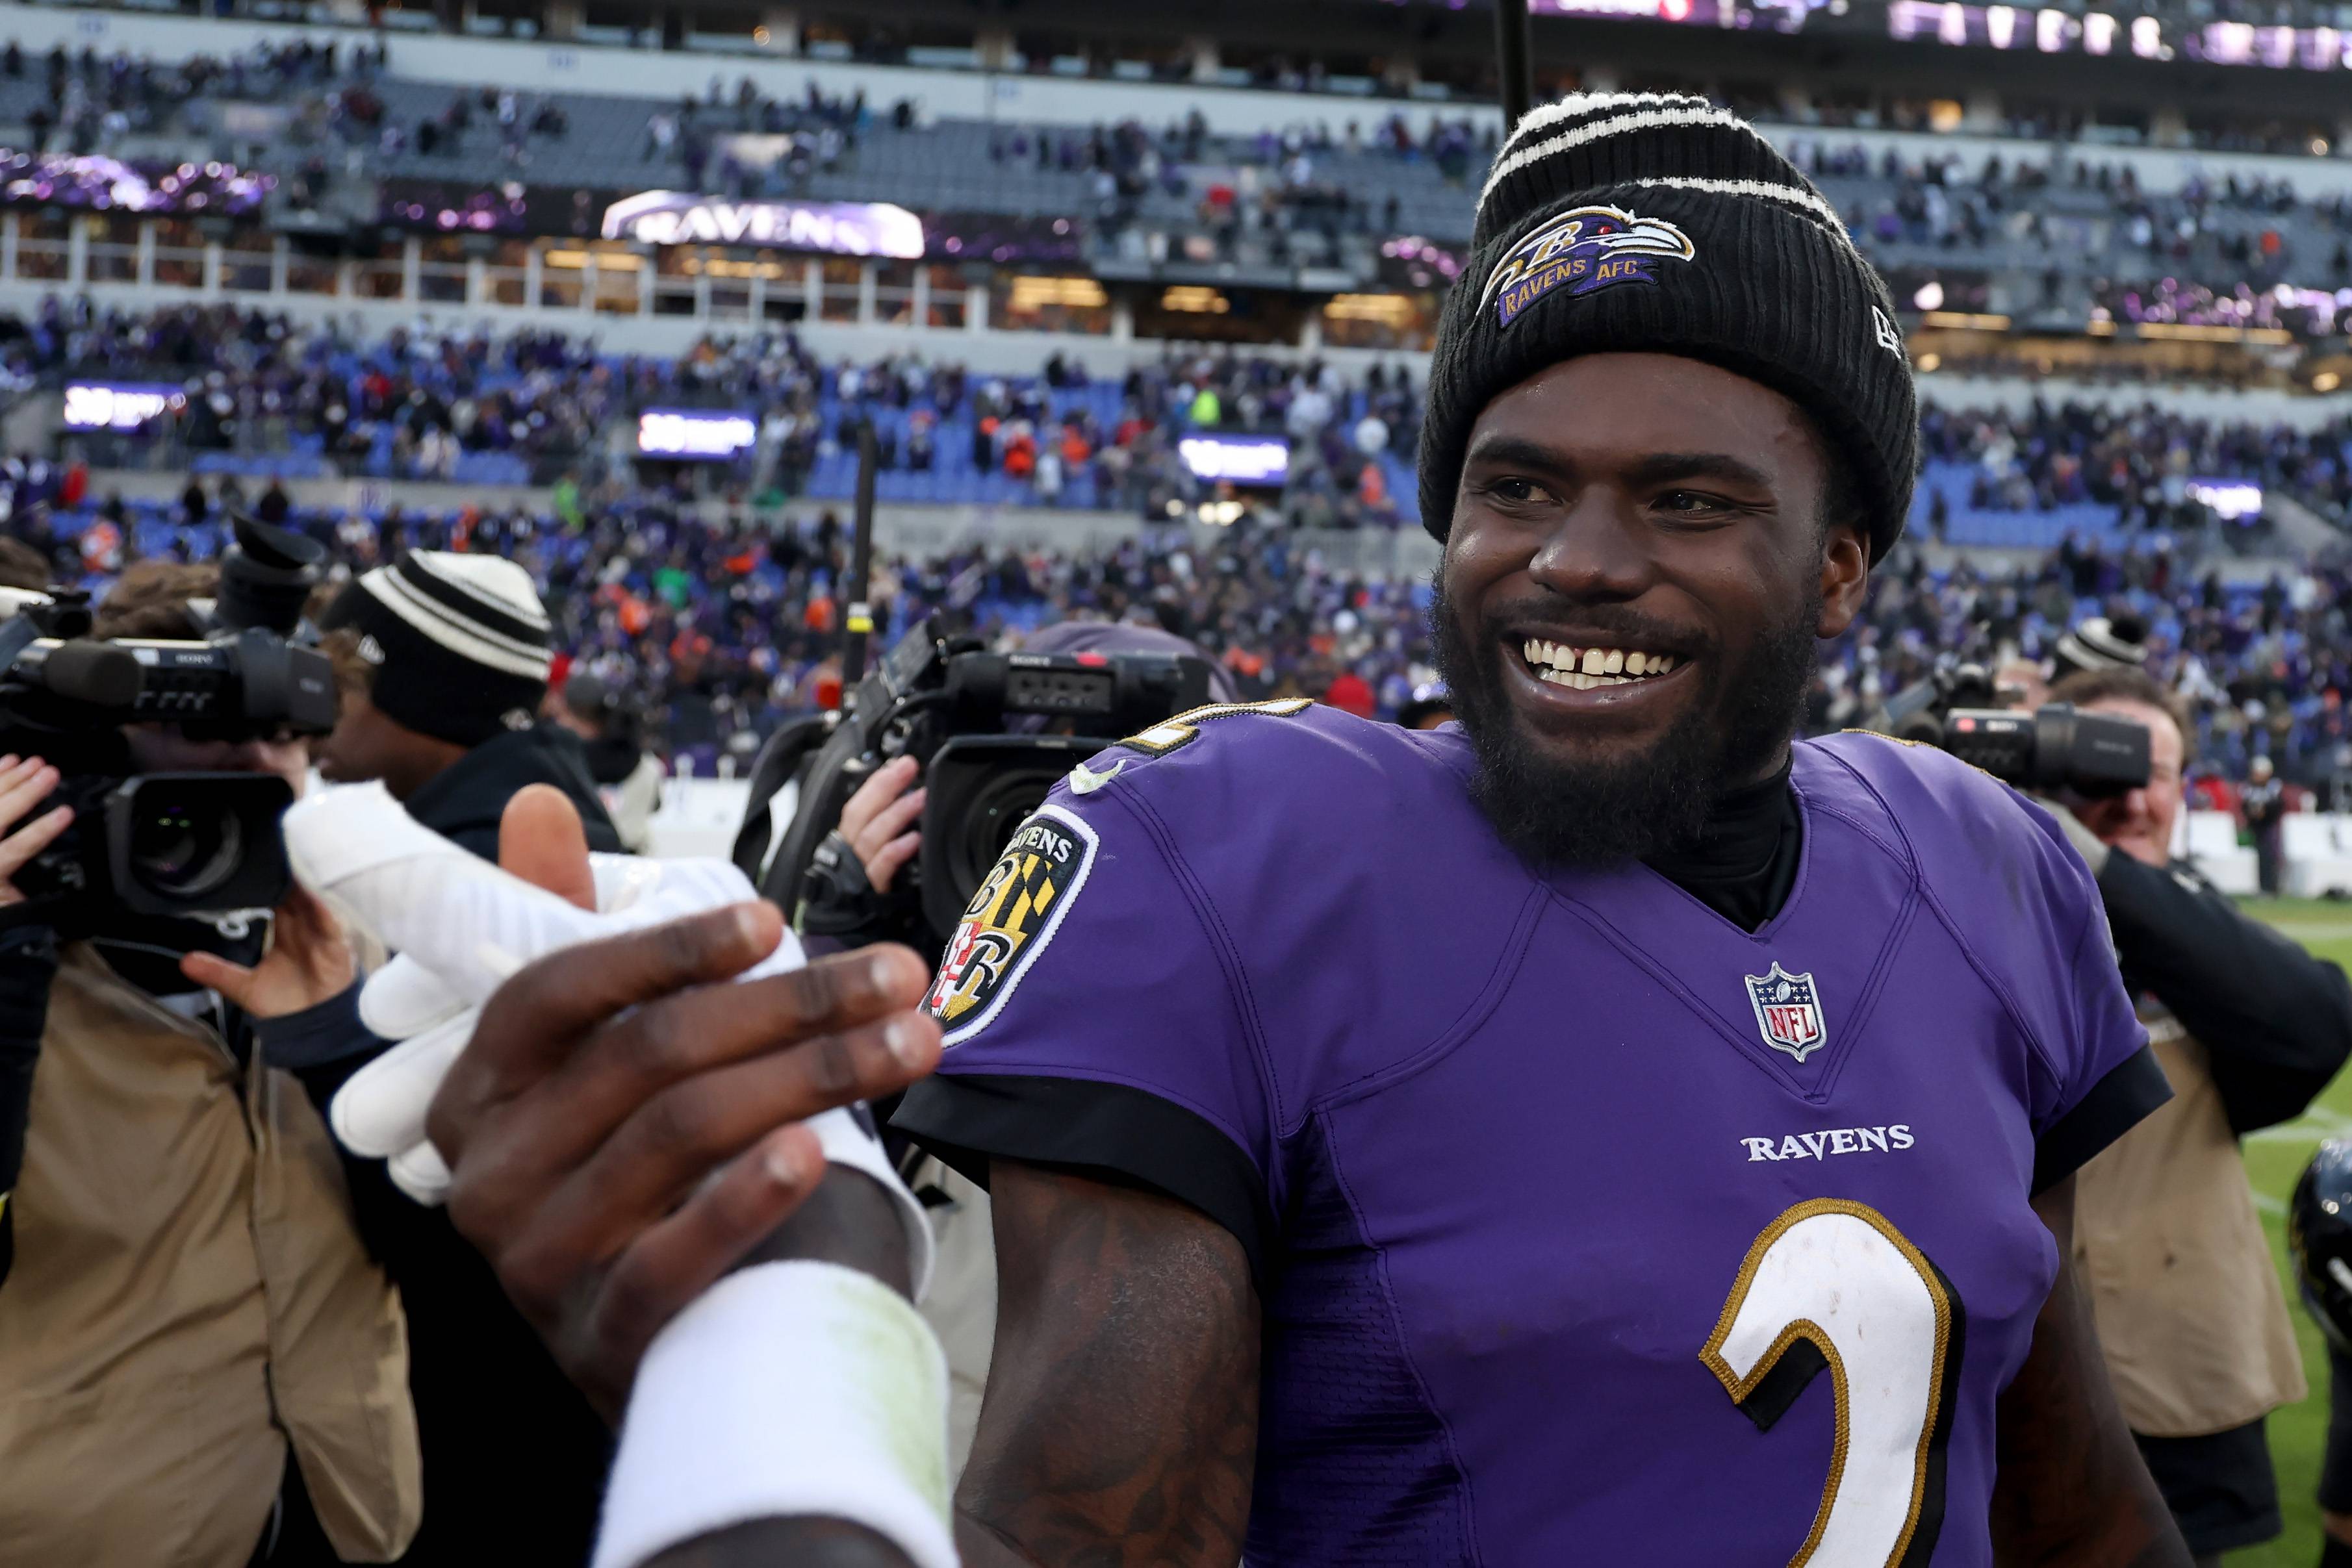 BALTIMORE, MARYLAND - DECEMBER 04: Quarterback Tyler Huntley #2 of the Baltimore Ravens celebrates following the Ravens 10-9 win over the Denver Broncos at M&T Bank Stadium on December 04, 2022 in Baltimore, Maryland.